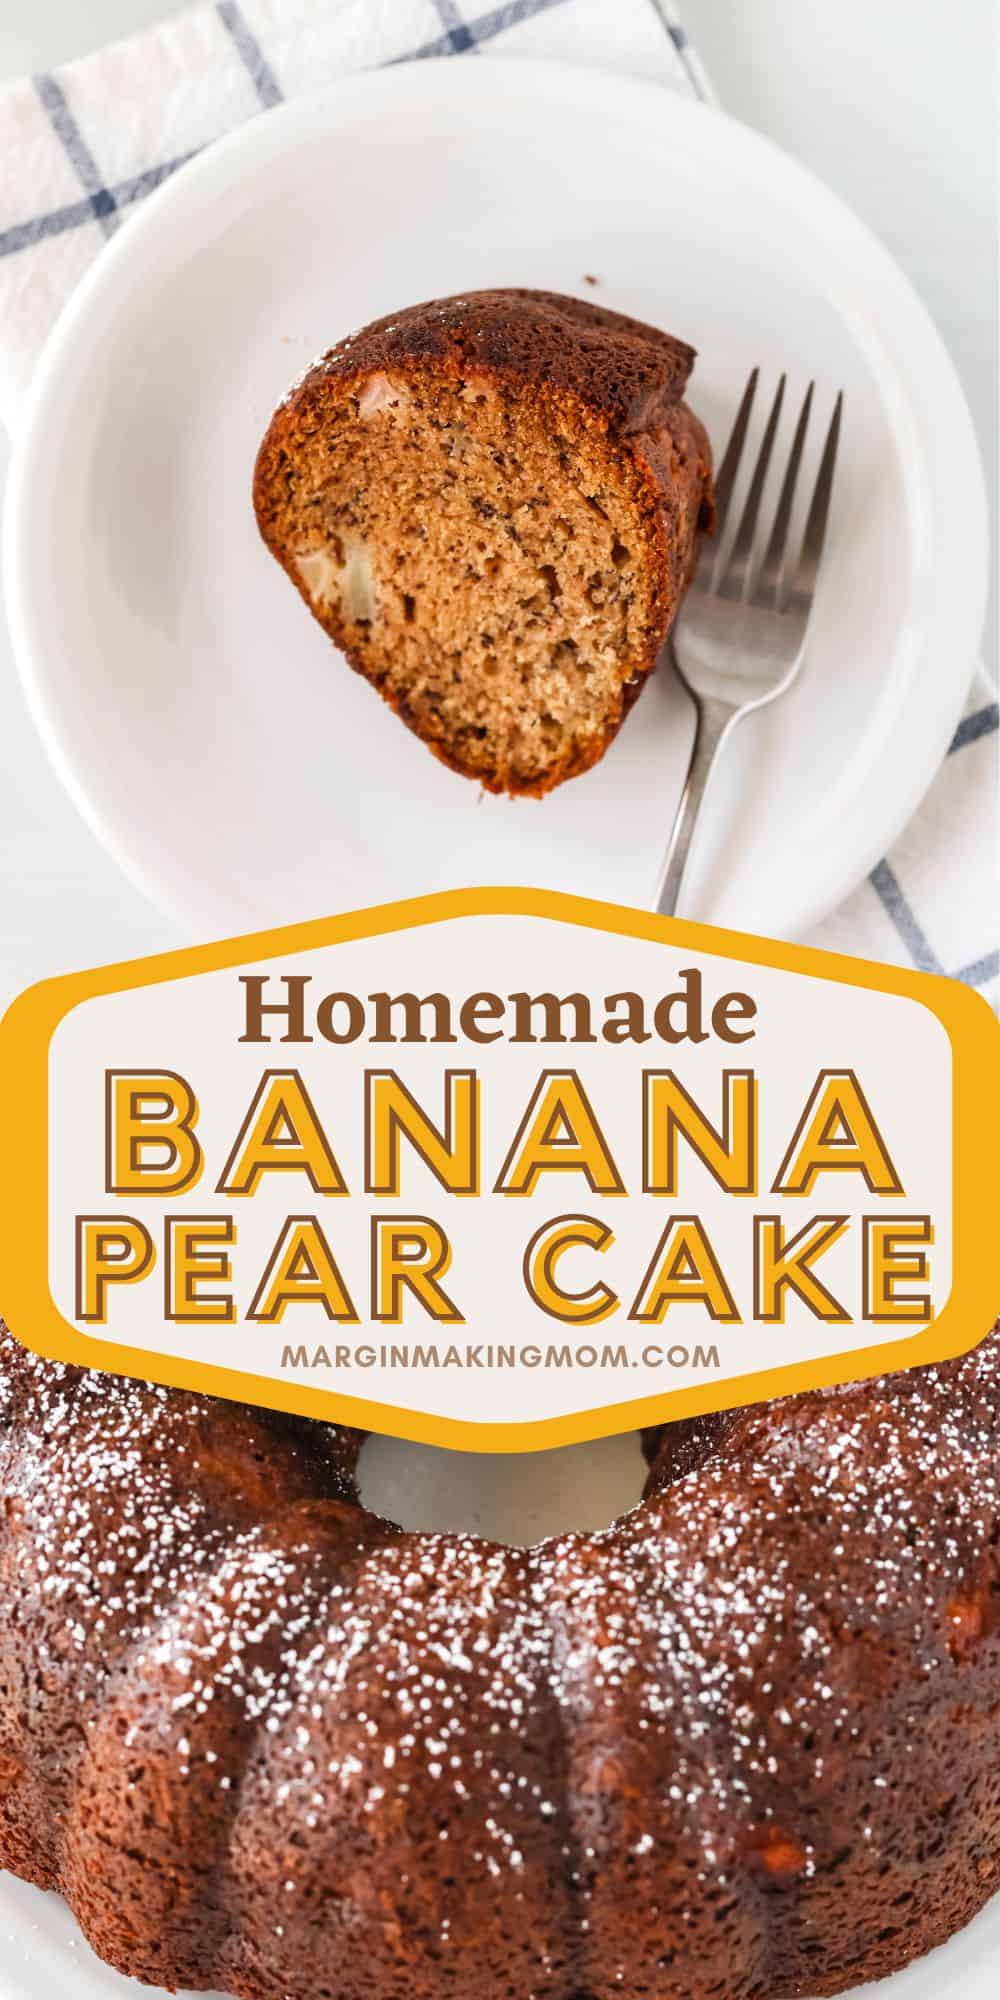 Two photos; one shows a slice of homemade banana pear cake on a white plate with a fork, the other shows the whole pear banana bundt cake on a plate, dusted with powdered sugar.